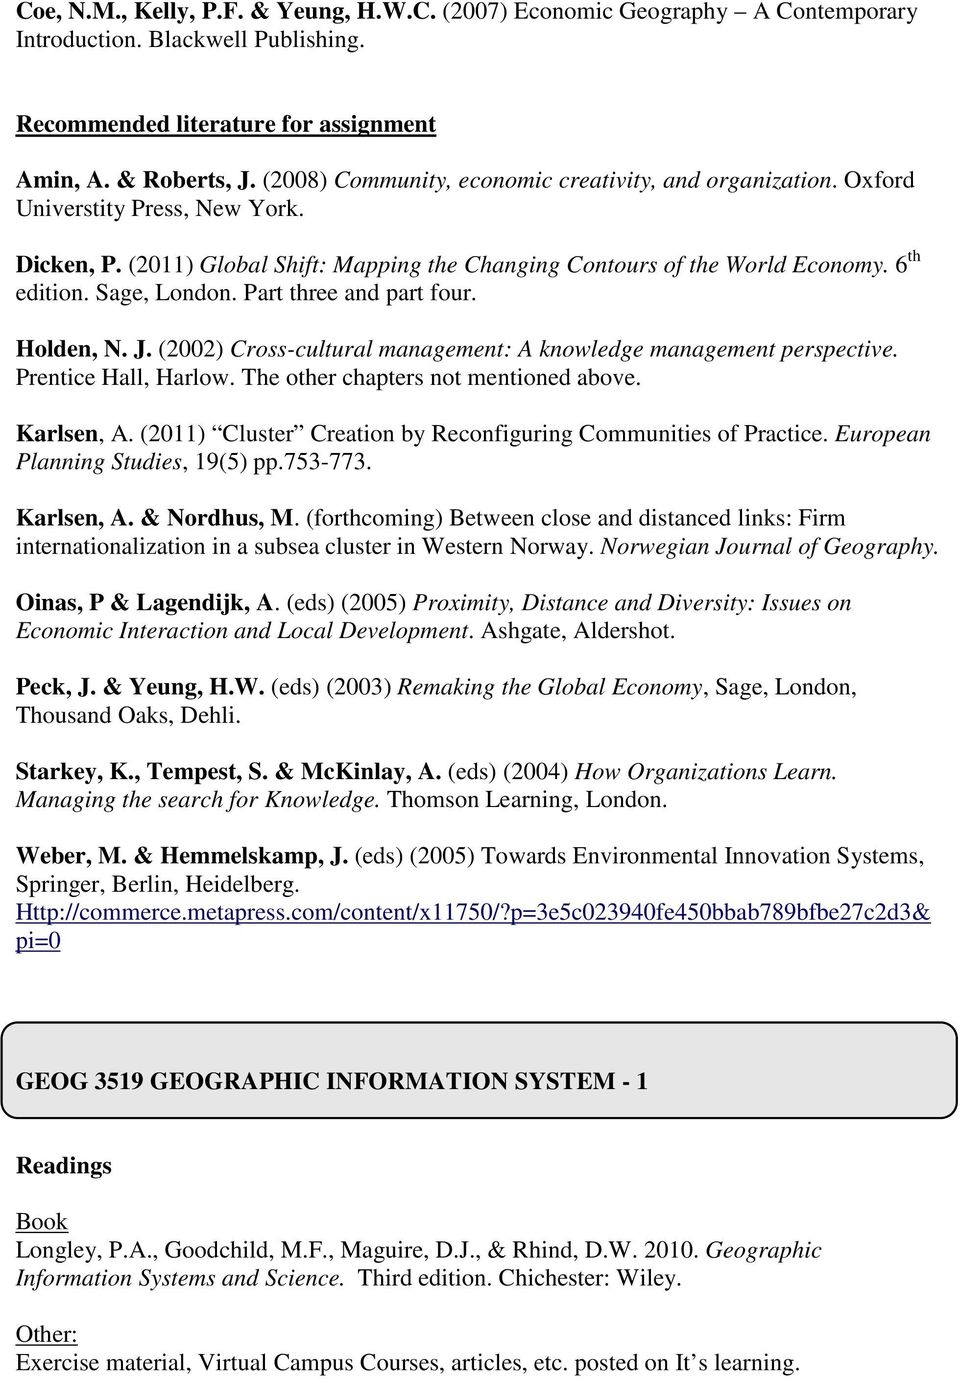 Sage, London. Part three and part four. Holden, N. J. (2002) Cross-cultural management: A knowledge management perspective. Prentice Hall, Harlow. The other chapters not mentioned above. Karlsen, A.